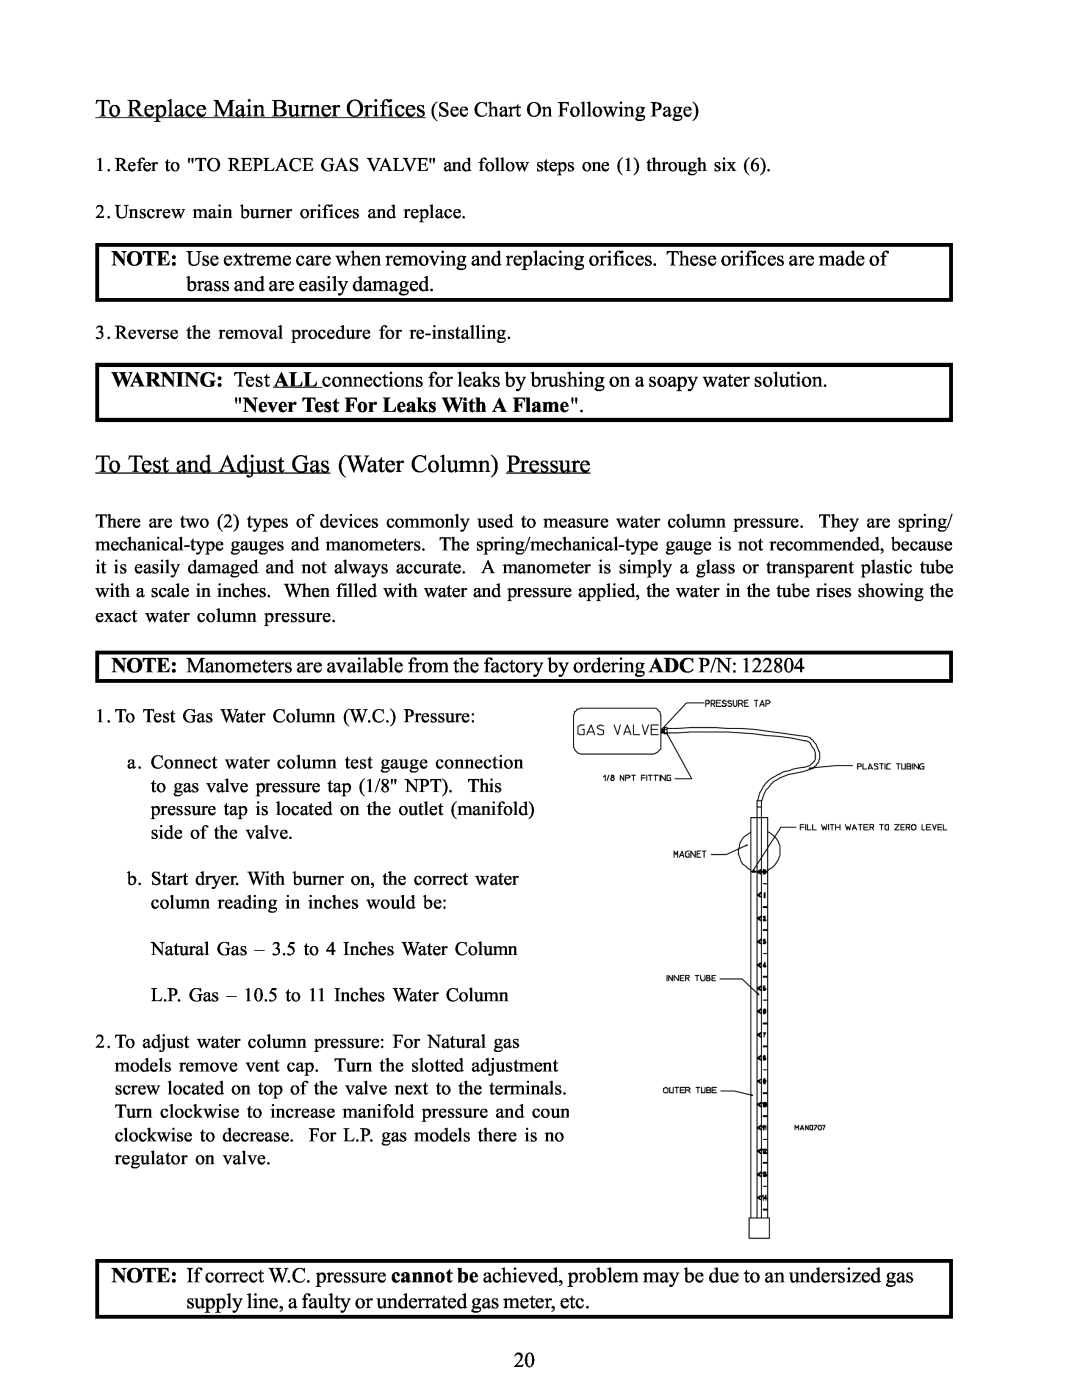 American Dryer Corp WDA-385 service manual To Replace Main Burner Orifices See Chart On Following Page 